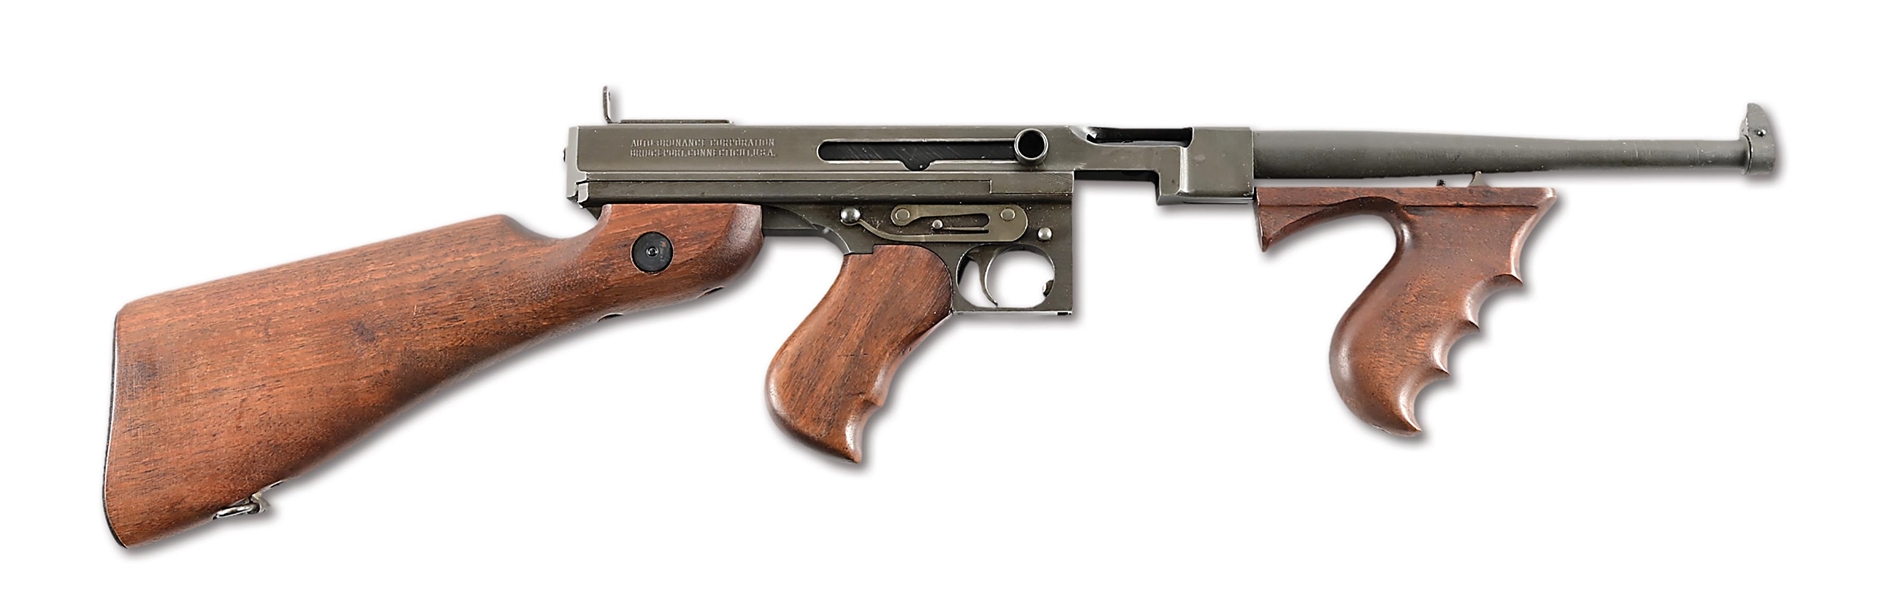 (N) SAVAGE MANUFACTURED M1A1 THOMPSON MACHINE GUN AS RETROFITTED FROM M1 TO M1A1 CONFIGURATION (CURIO & RELIC).